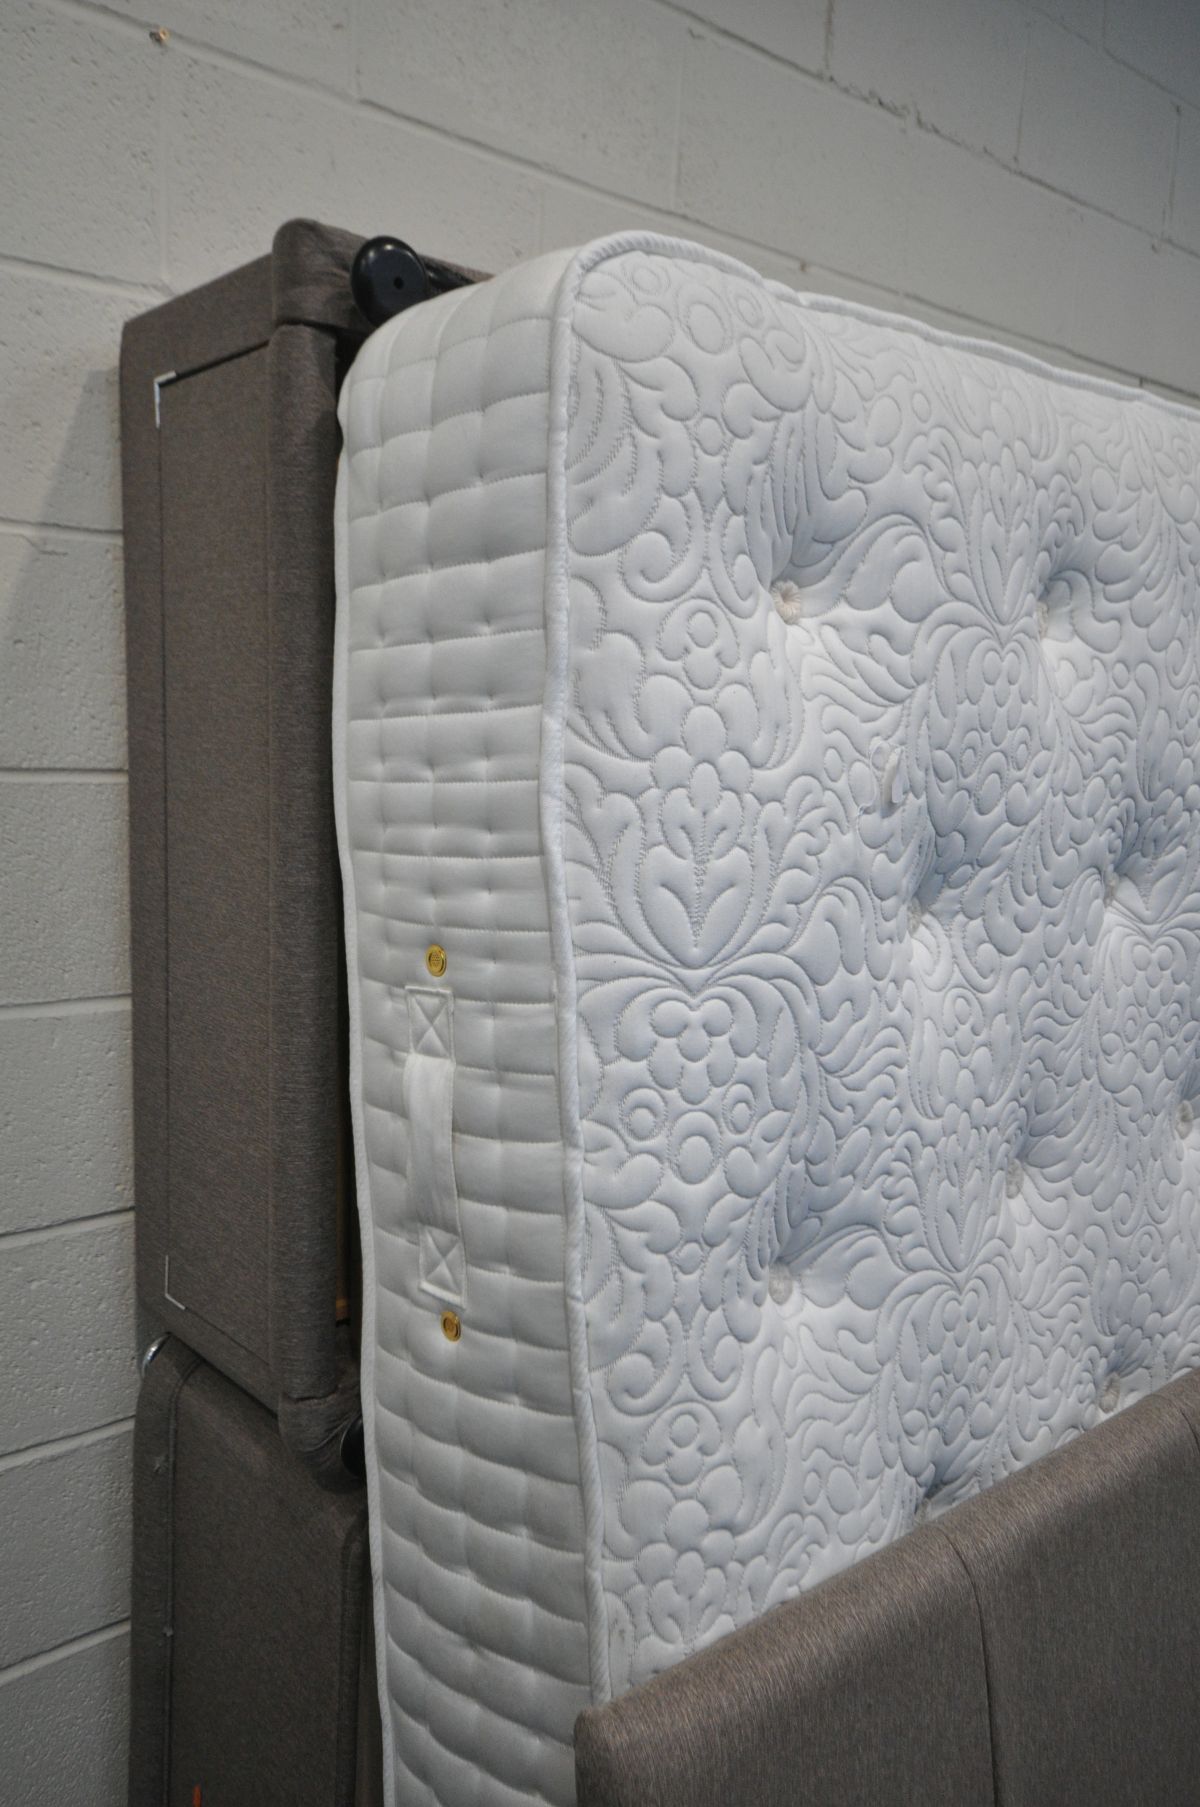 A 4FT6 DIVAN BED, HEADBOARD AND SERENE 1000 POCKET AND MEMORY FOAM MATTRESS - Image 2 of 3